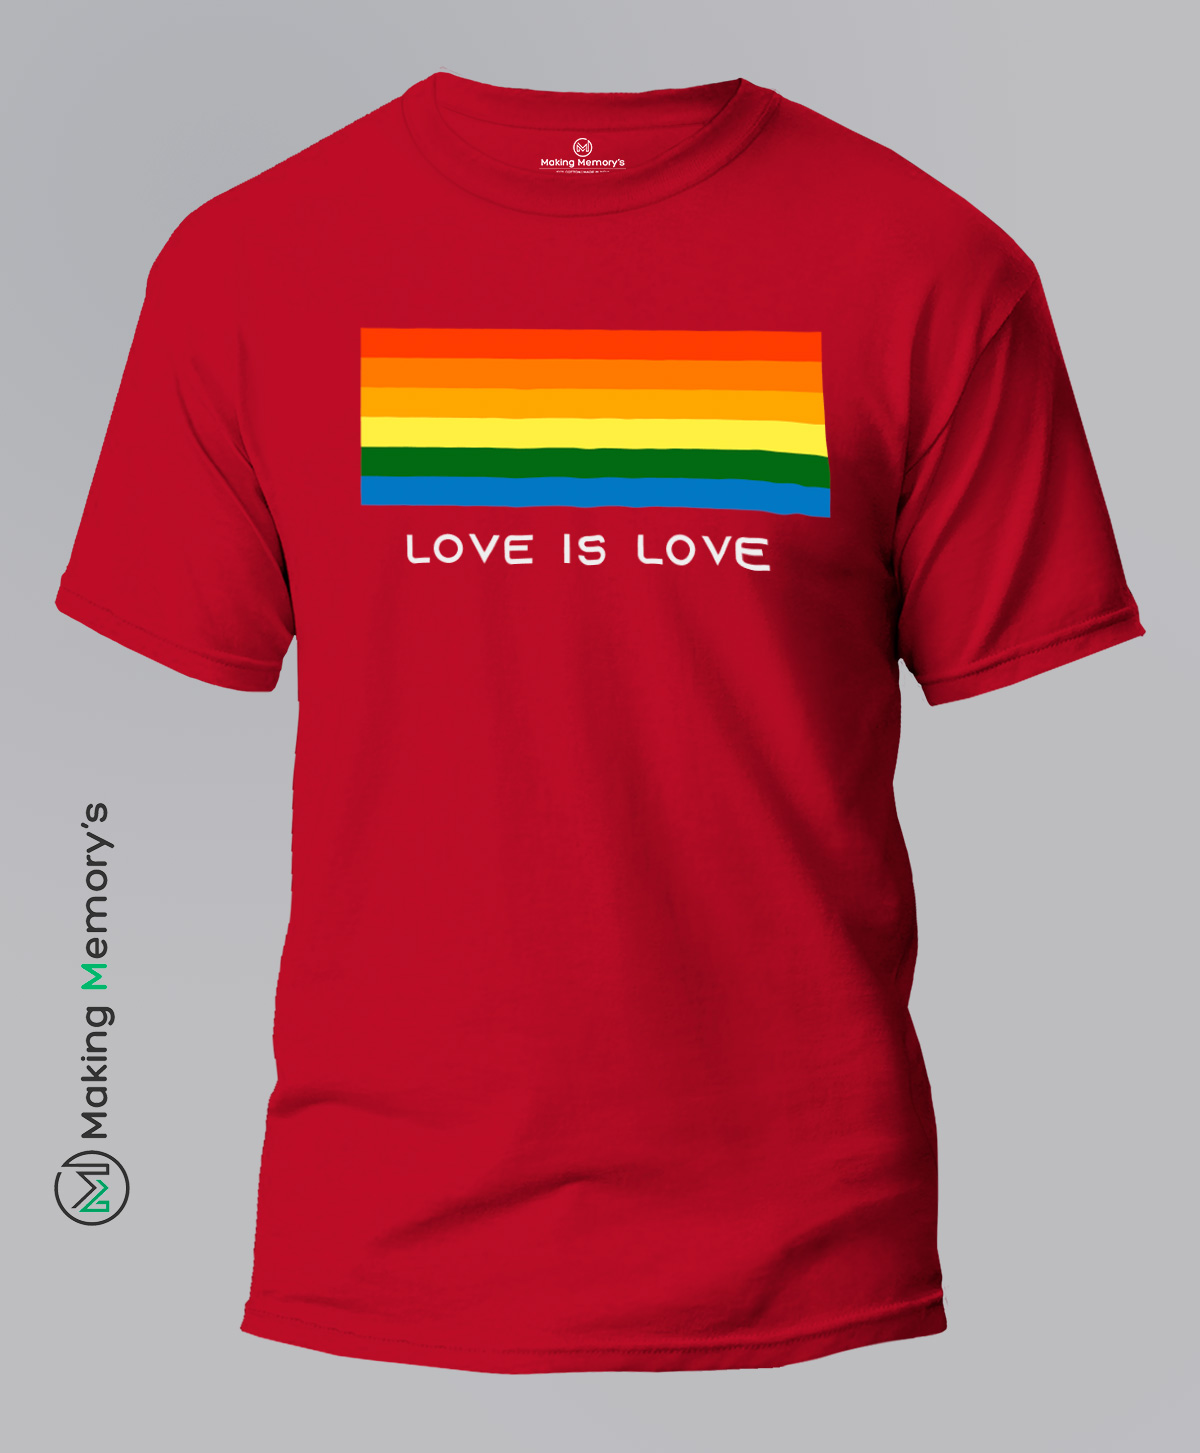 Love-Is-Love-Red-T-Shirt